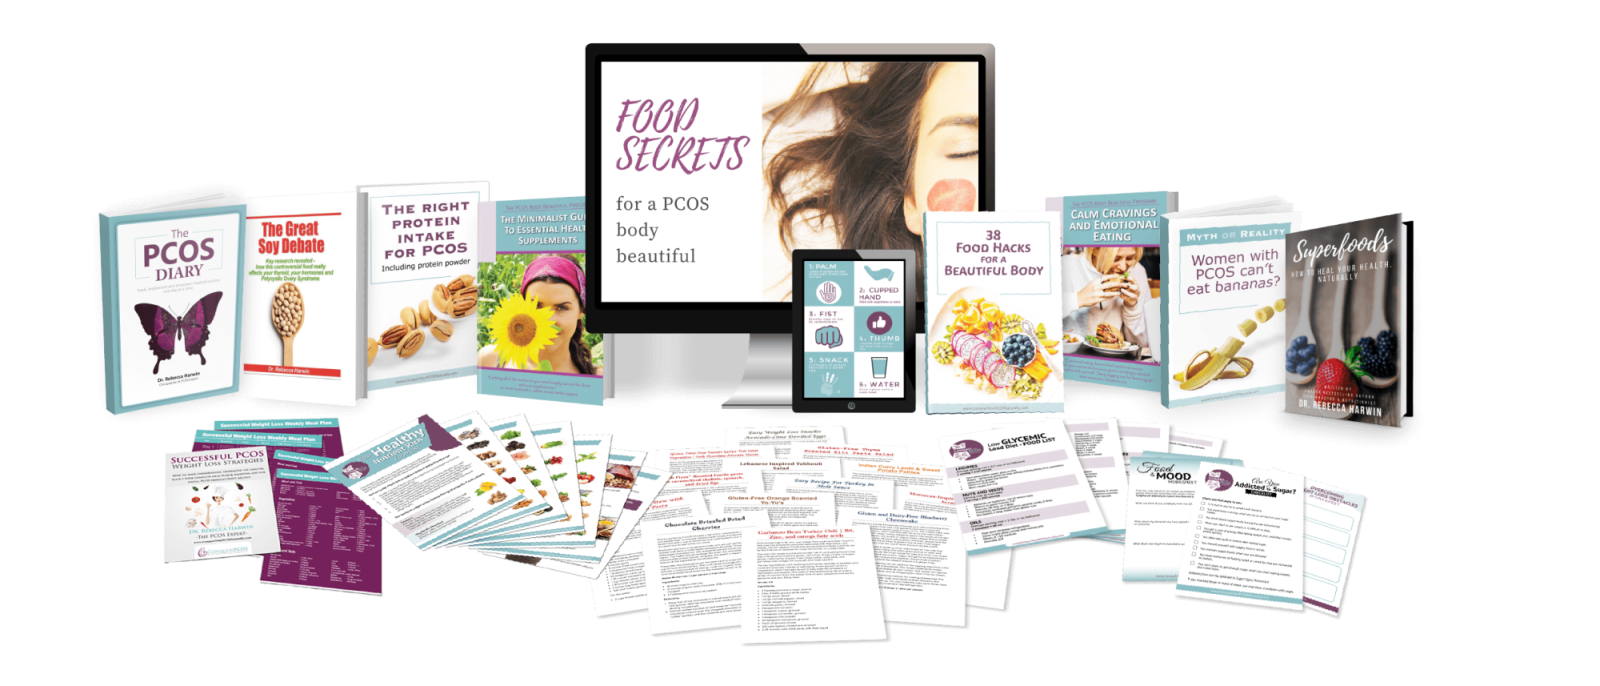 food secrets for a pcos beautiful body graphic